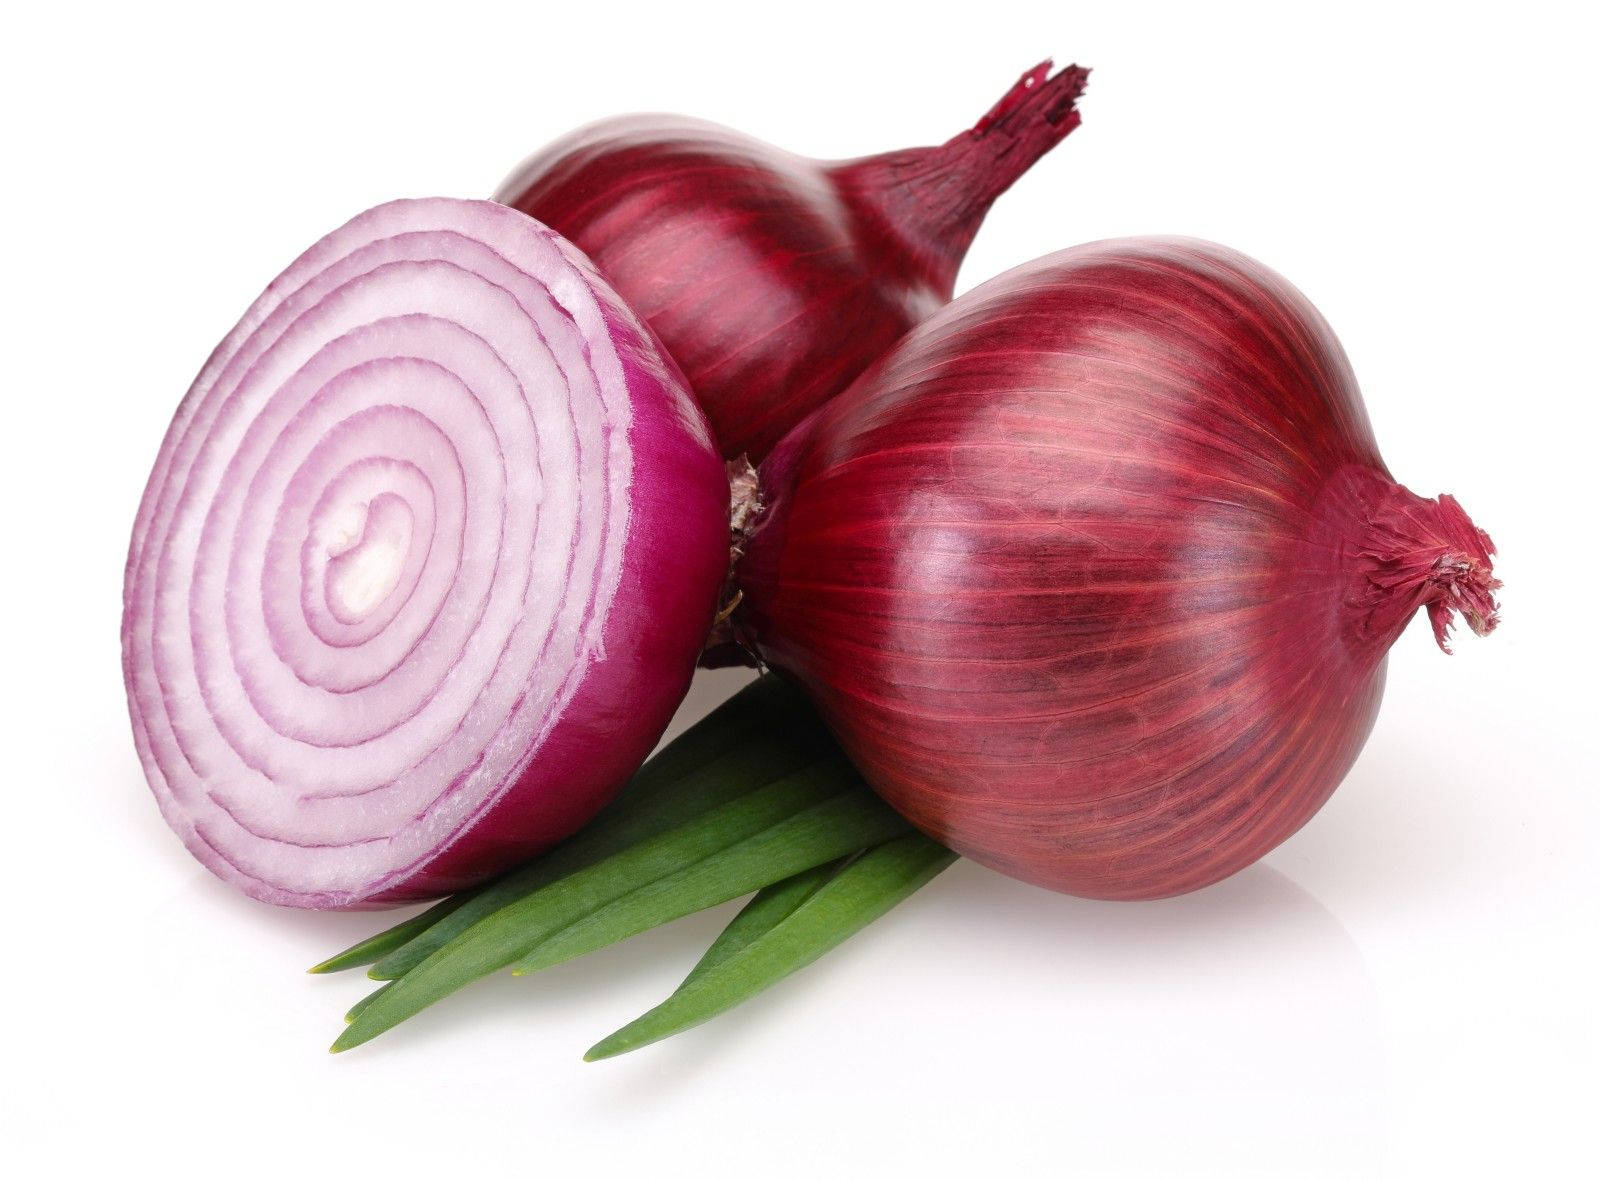 Whole And Half-Cut Red Onions Wallpaper